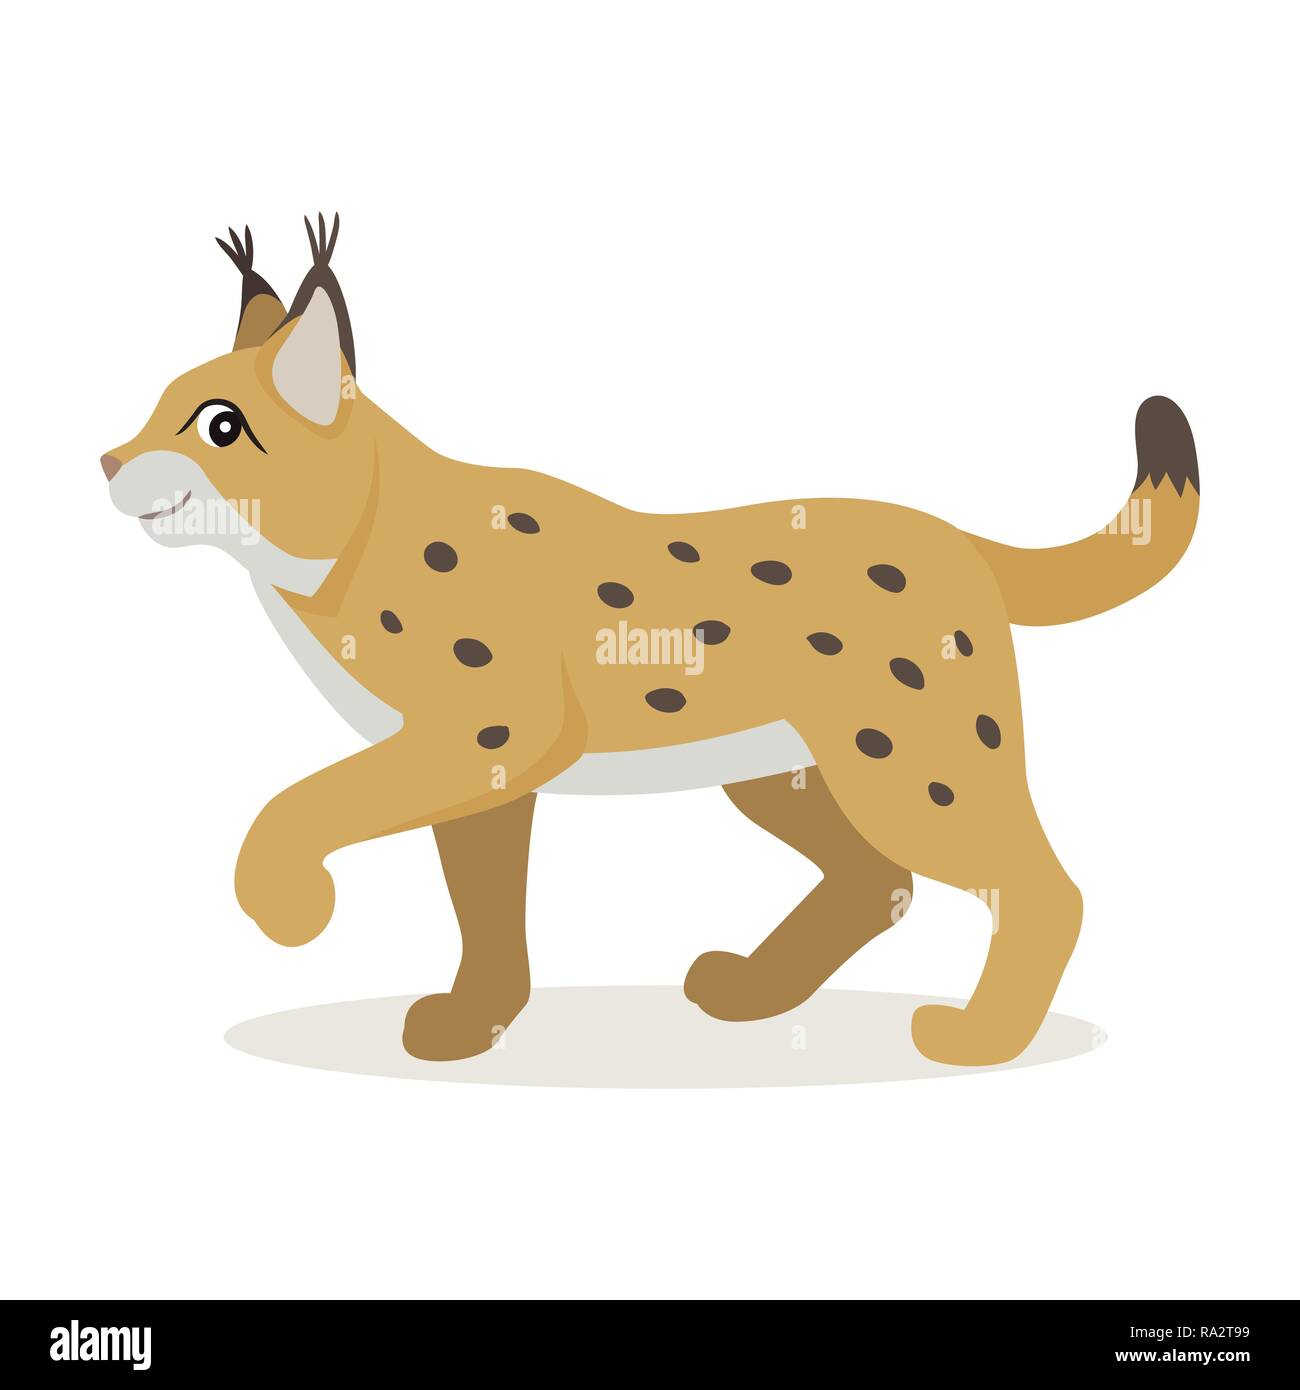 Friendly forest animal, cute yellow lynx icon isolated Stock Vector